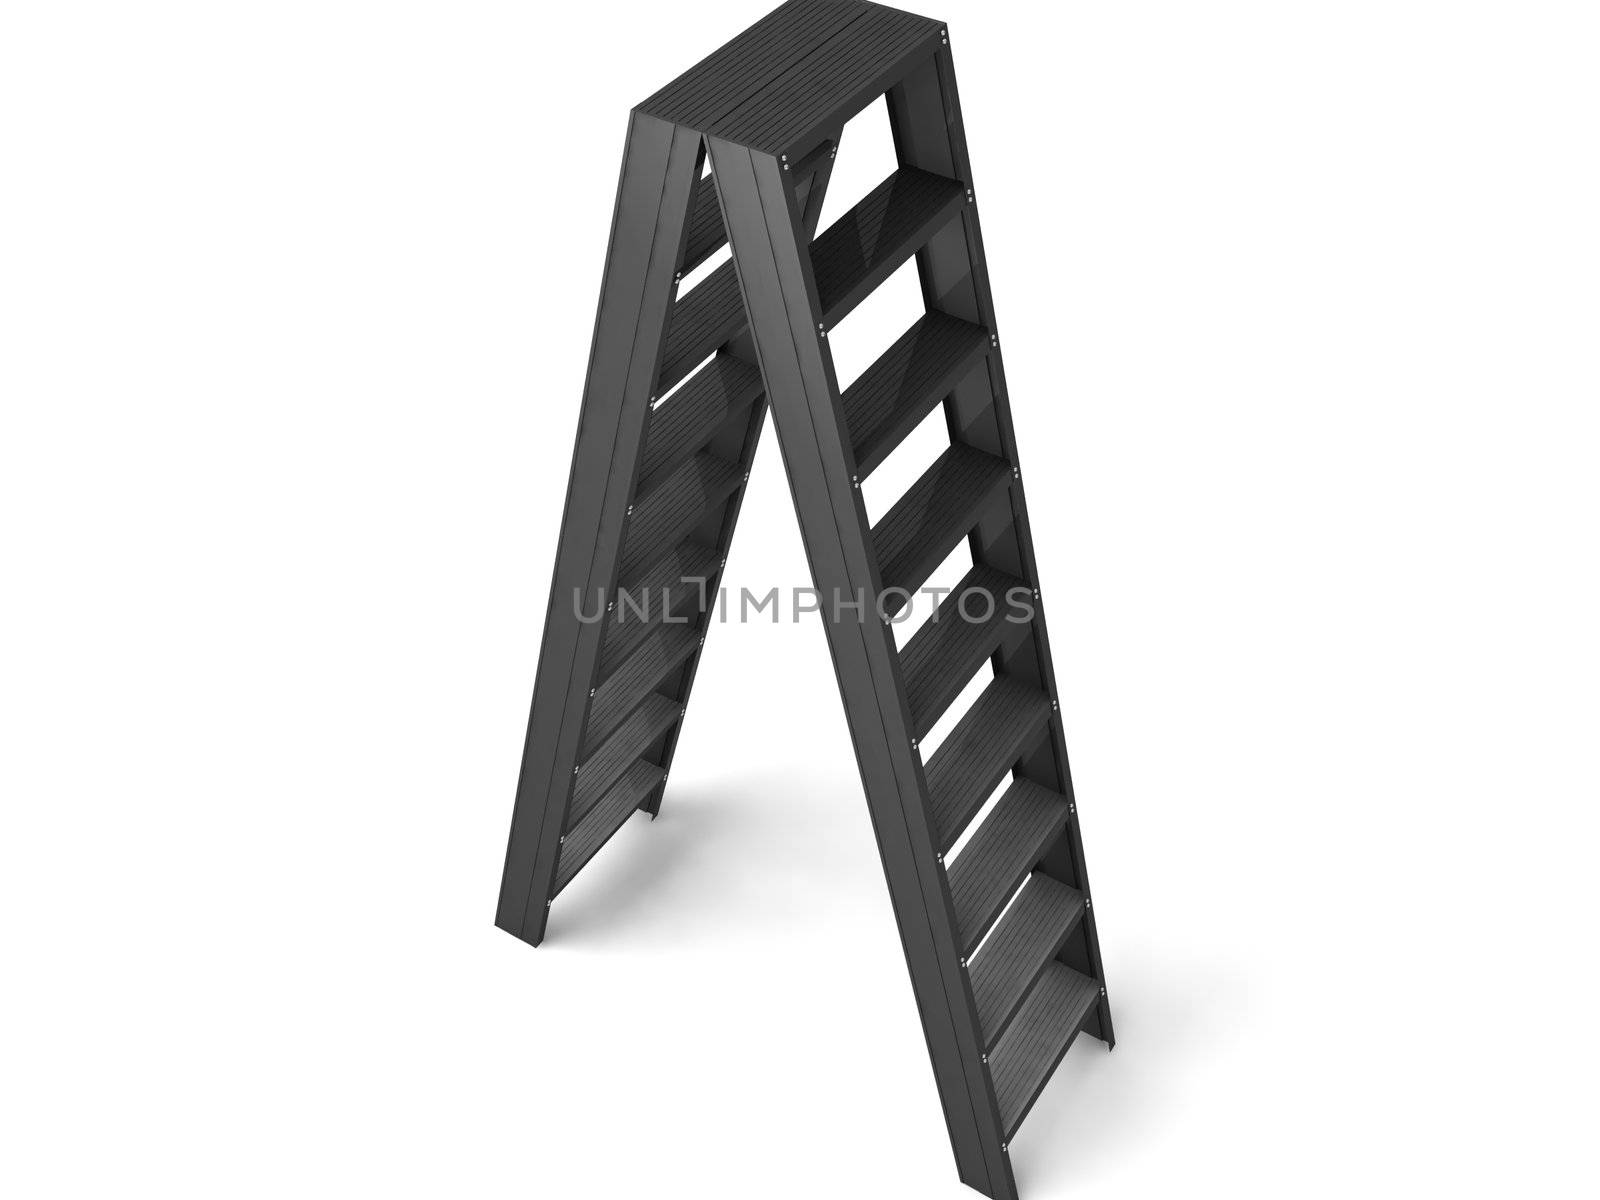 rendered three dimensional ladder case isolated on white background